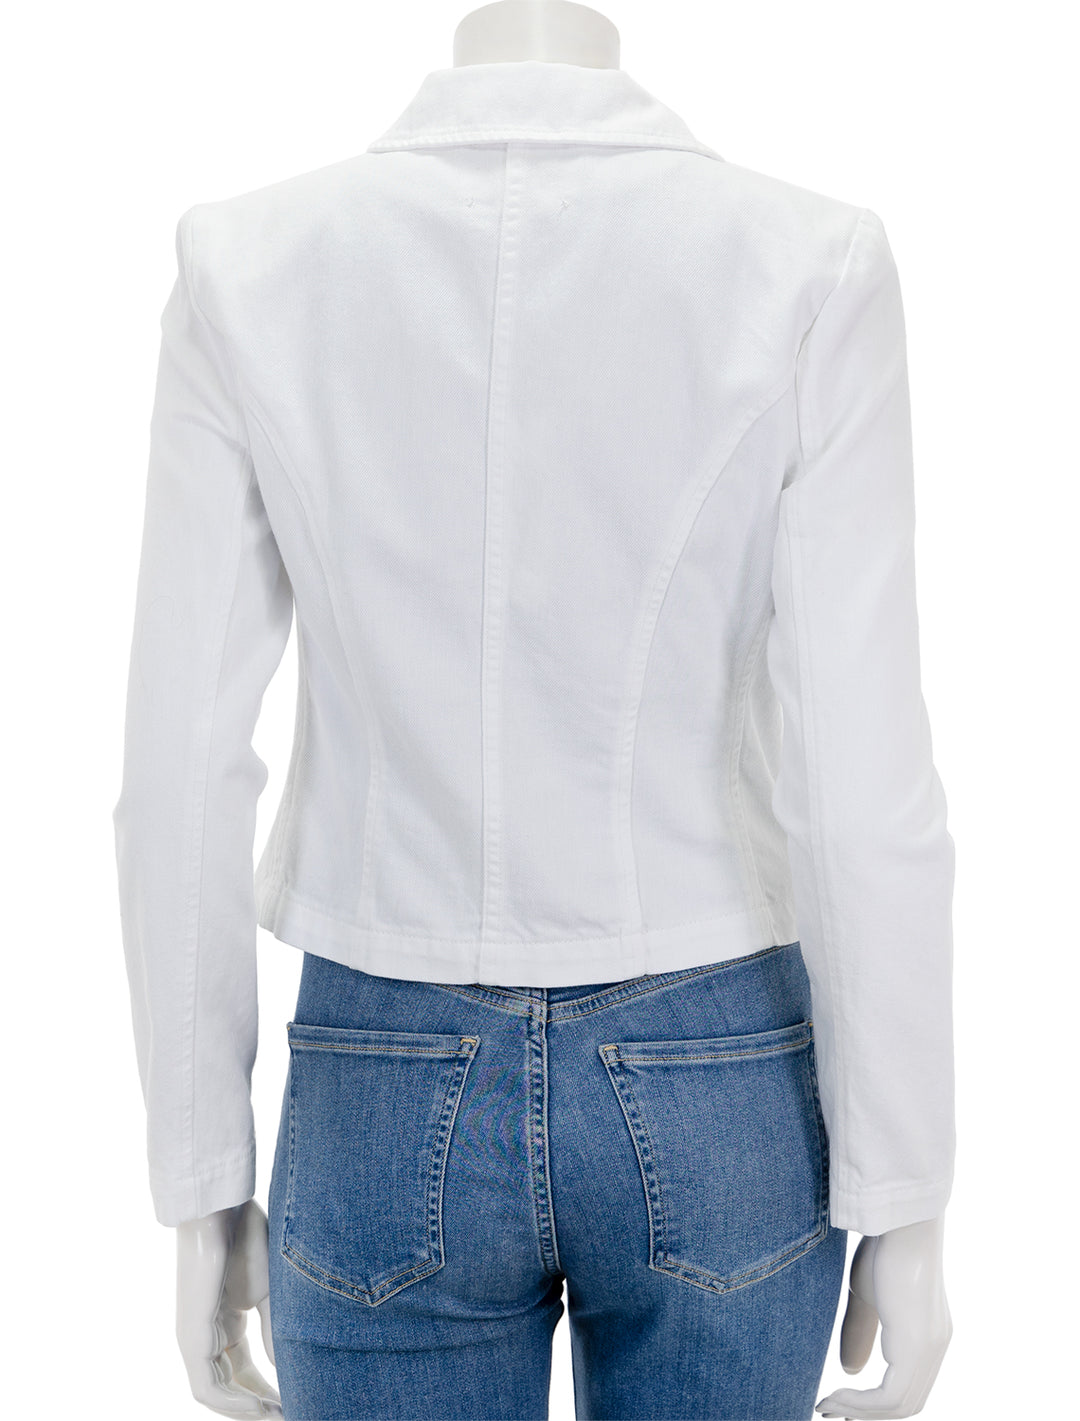 Back view of L'agence's wayne crop double breasted jacket in blanc.